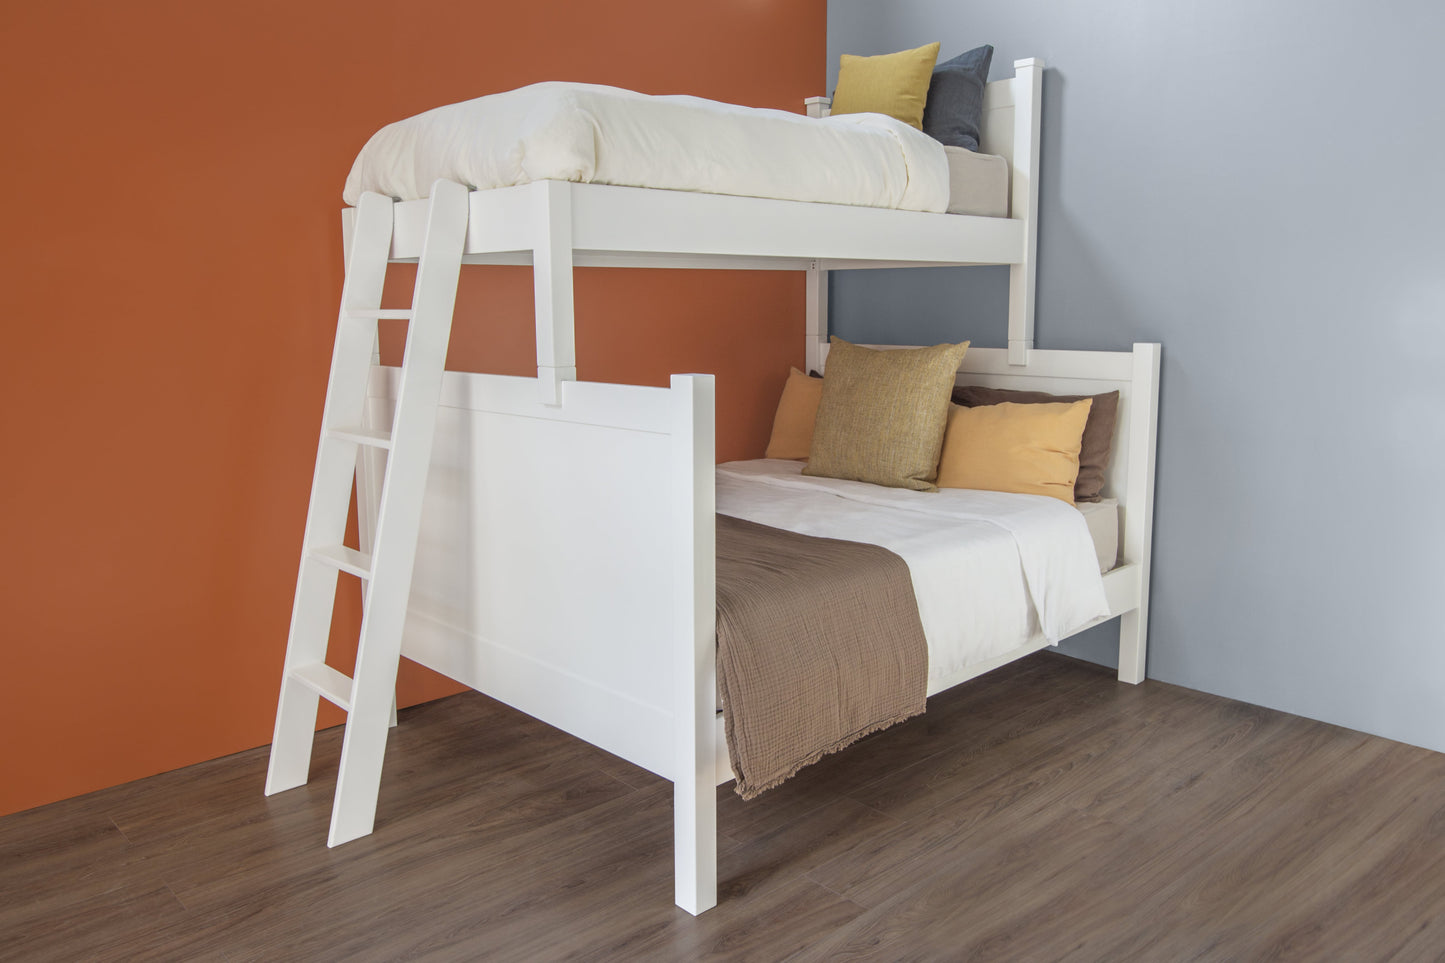 Lynx 1 double bunk bed - The Room